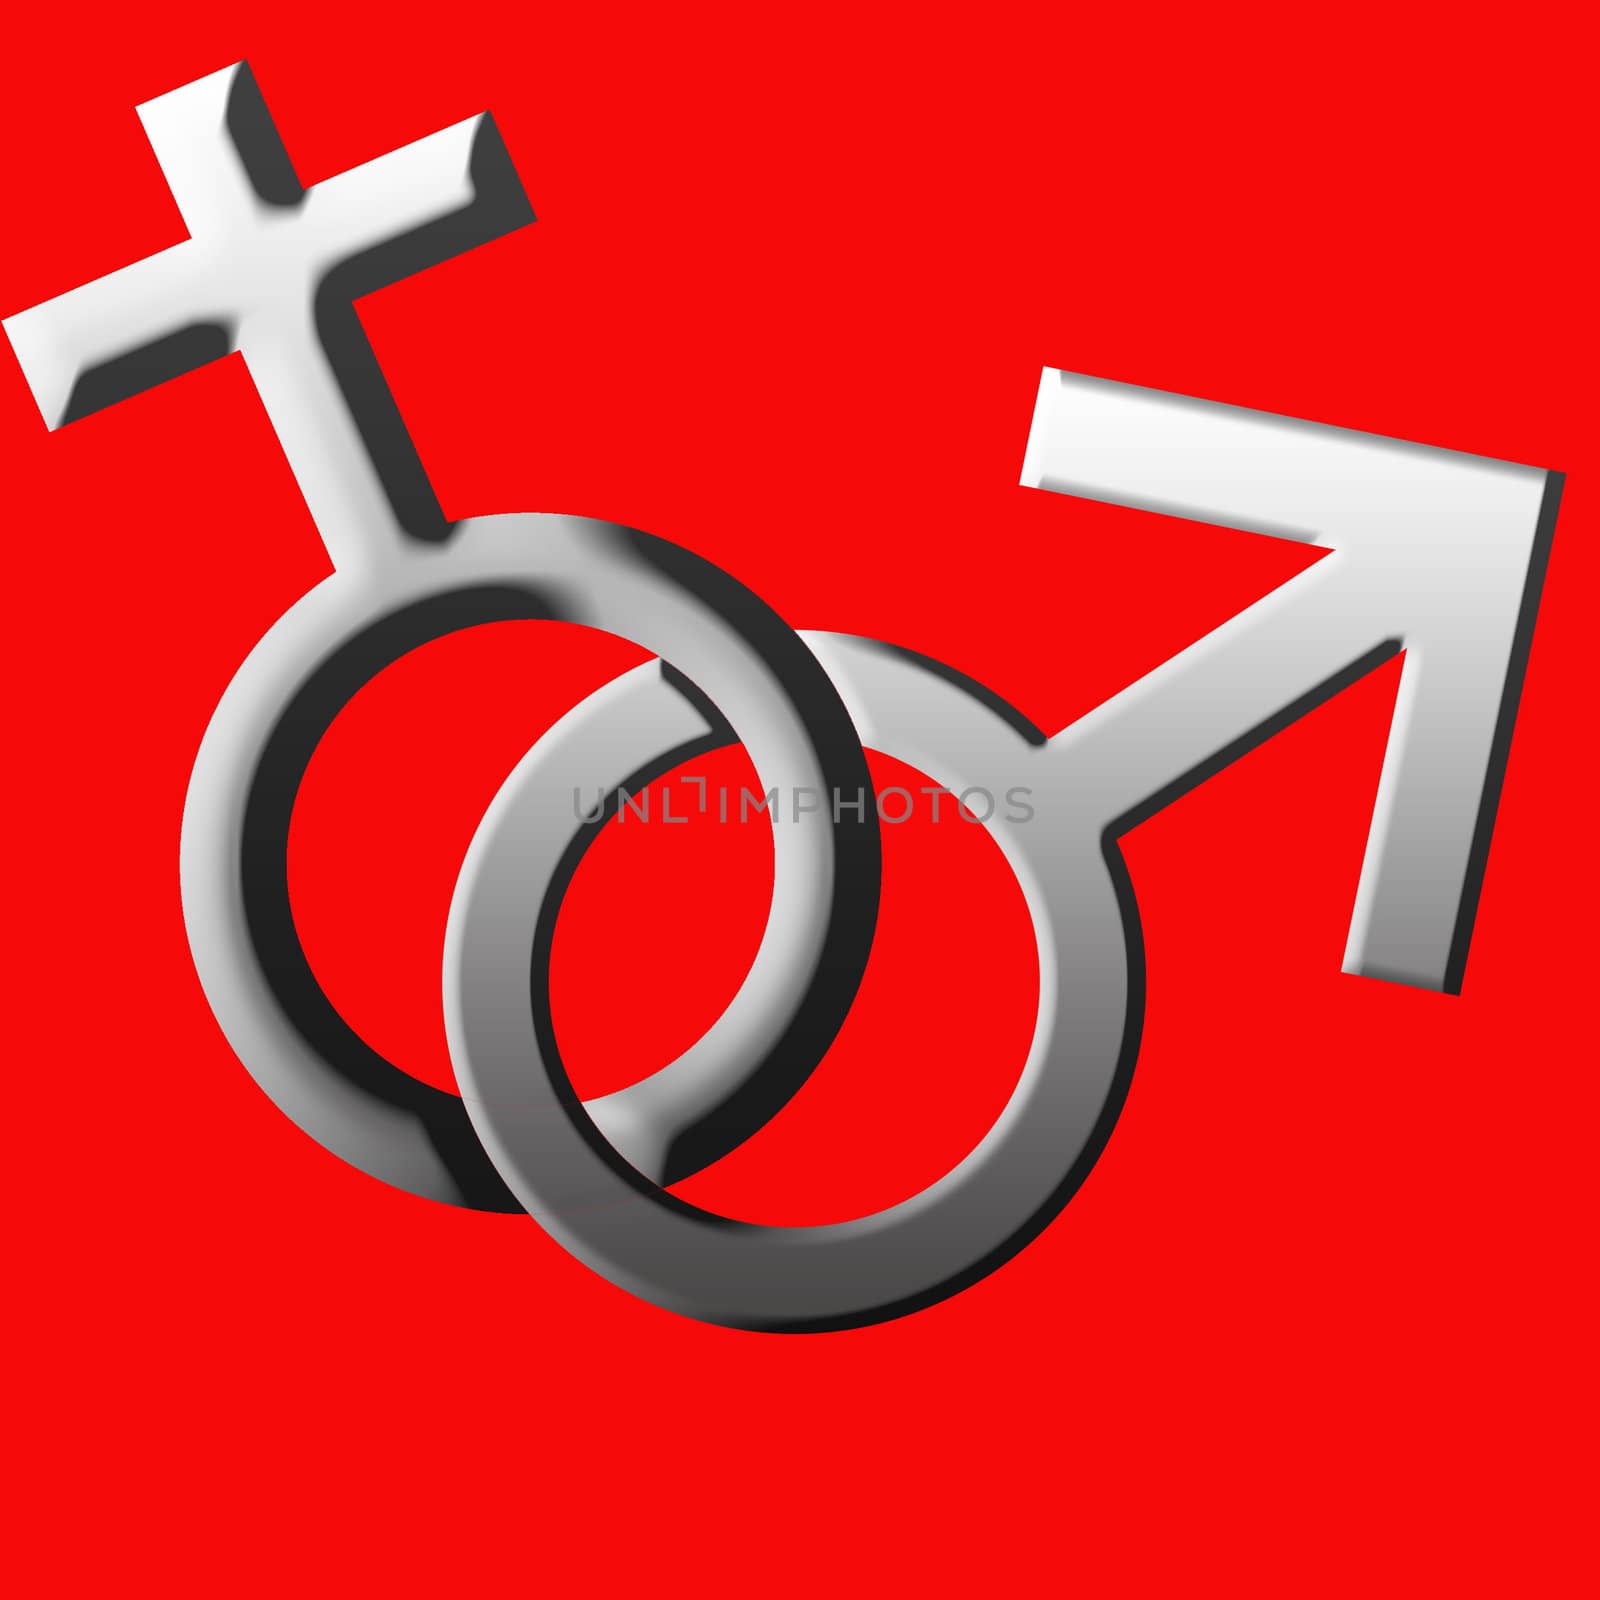 illustration of the man and woman signs on the red background